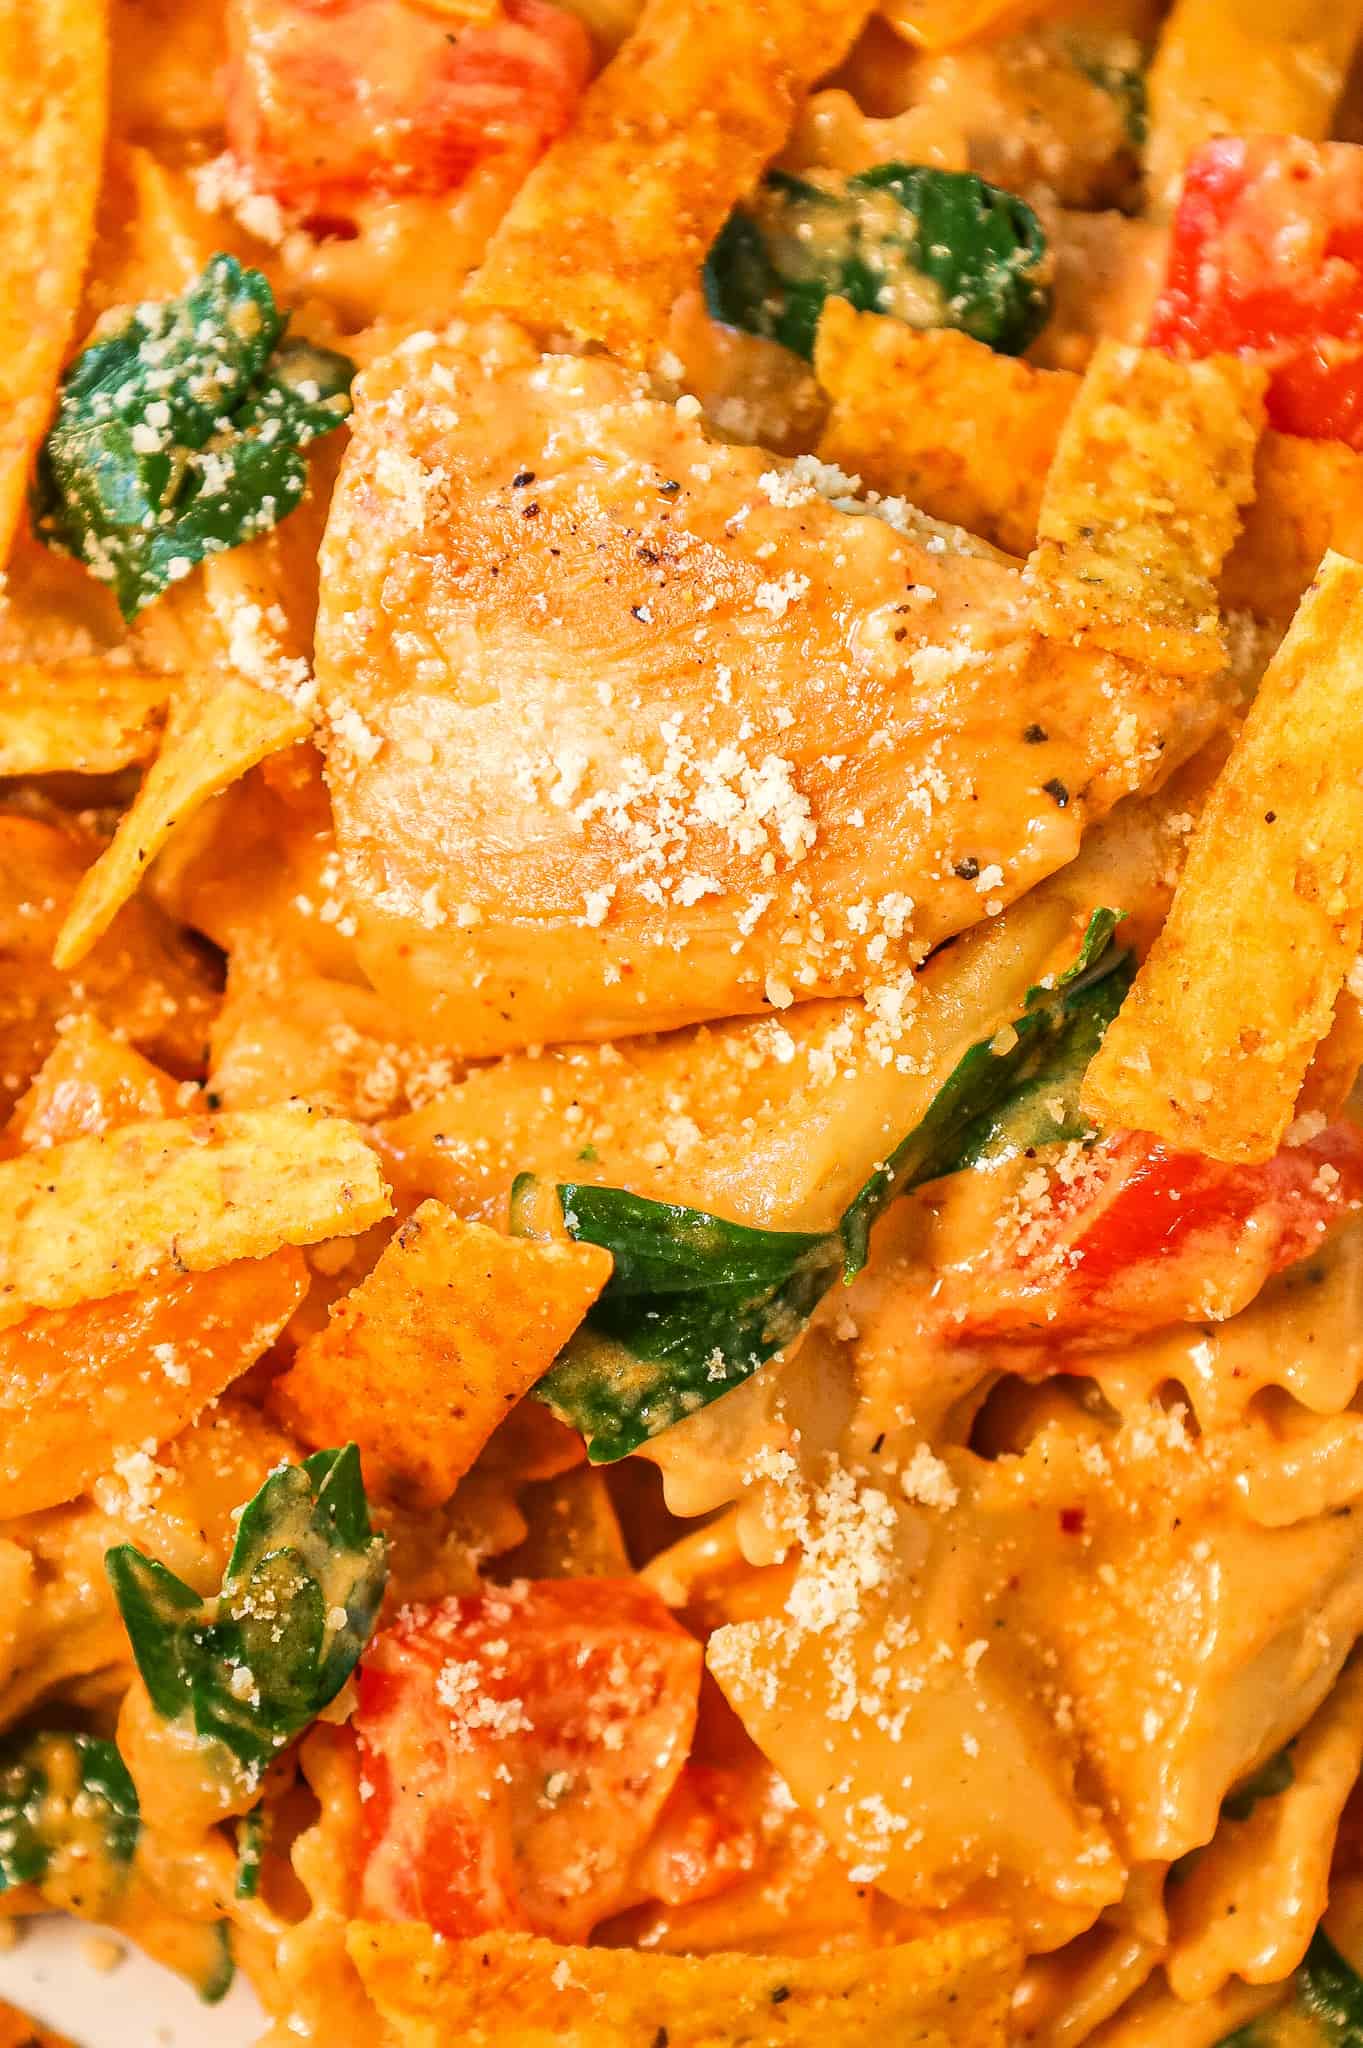 Spicy Chicken Chipotle Pasta is a delicious creamy pasta recipe loaded with diced peppers, parmesan cheese, chipotle pepper sauce and chicken breast chunks.